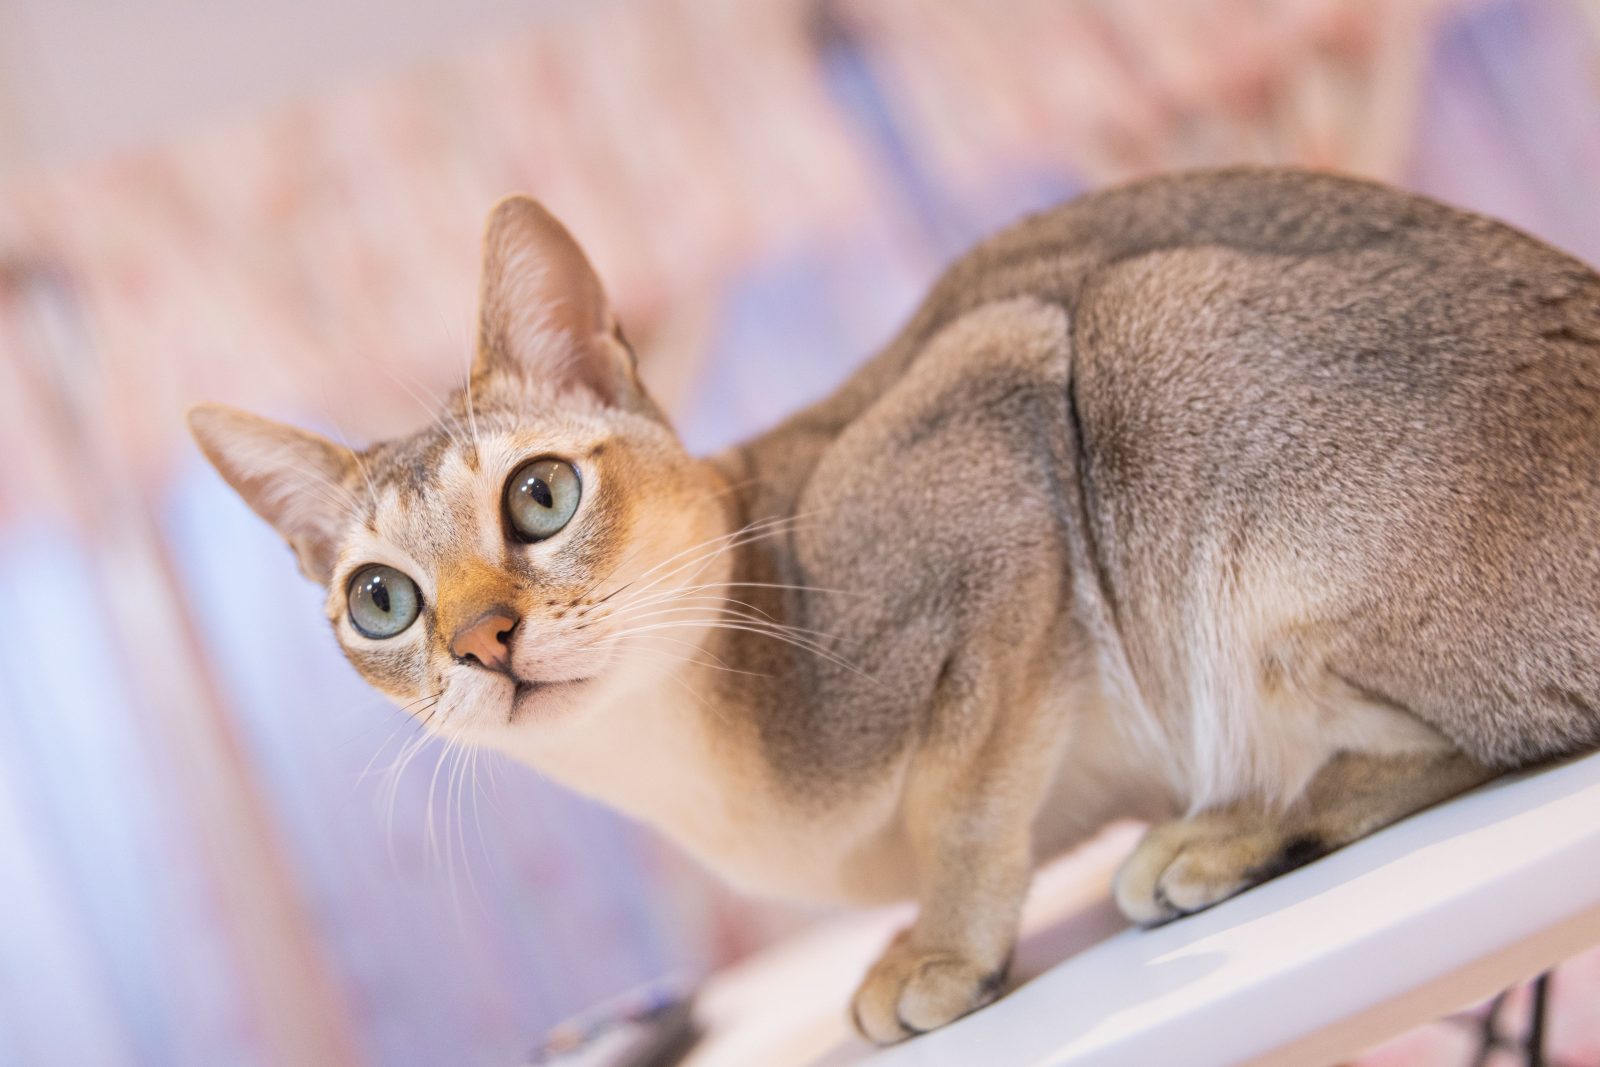 Are Cats More Intelligent than Humans?